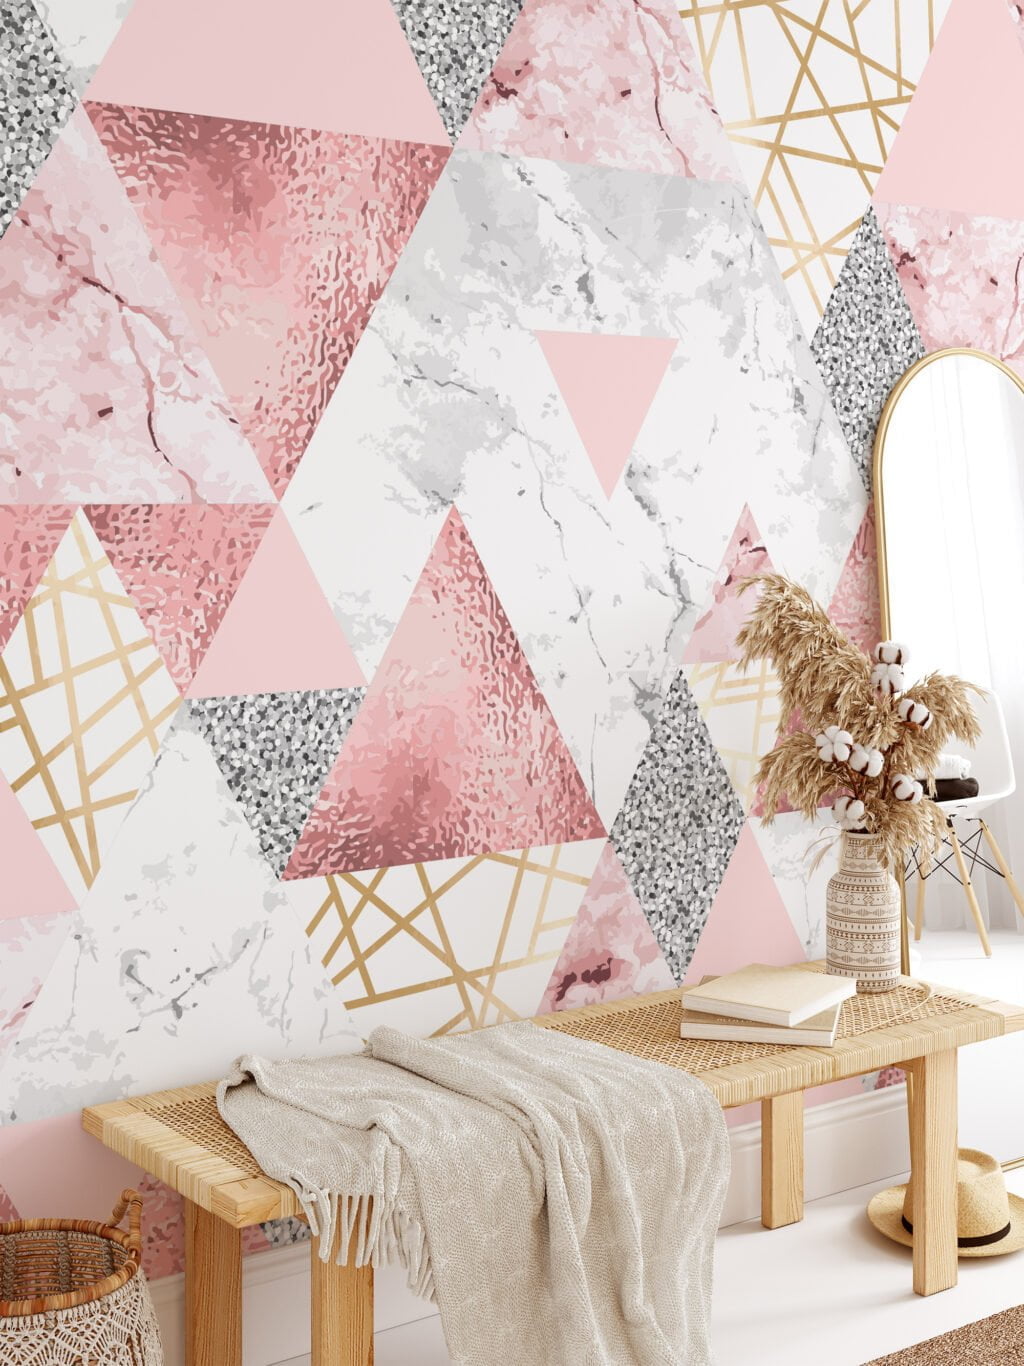 Grey And Pink Geometric Shaped Wallpaper With Frosted Texture Effect, Modern Triangular Peel & Stick Wall Mural